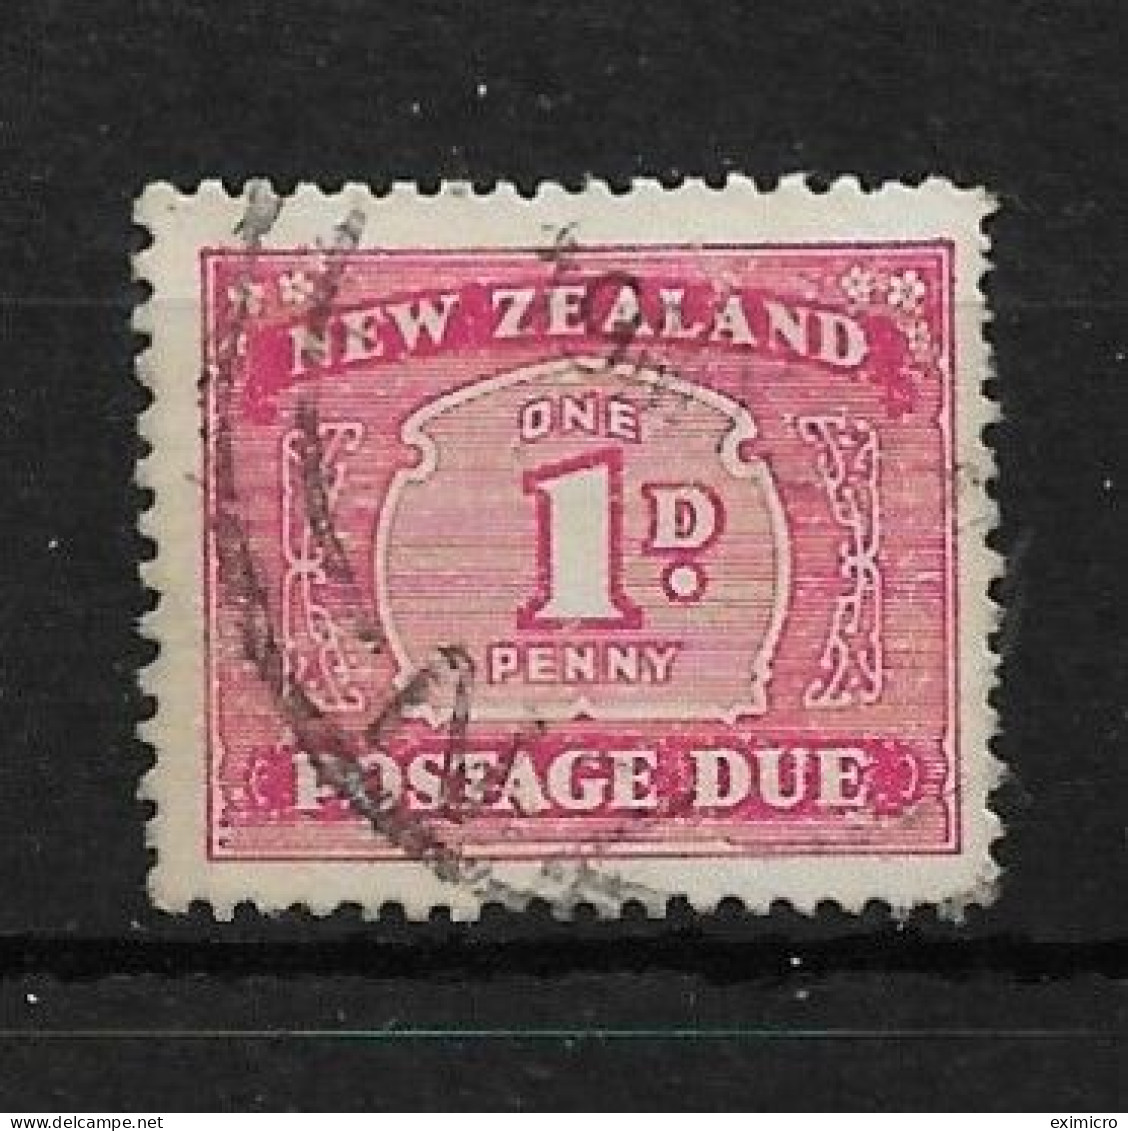 NEW ZEALAND 1939 1d POSTAGE DUE SG D42 FINE USED Cat £2.50 - Postage Due